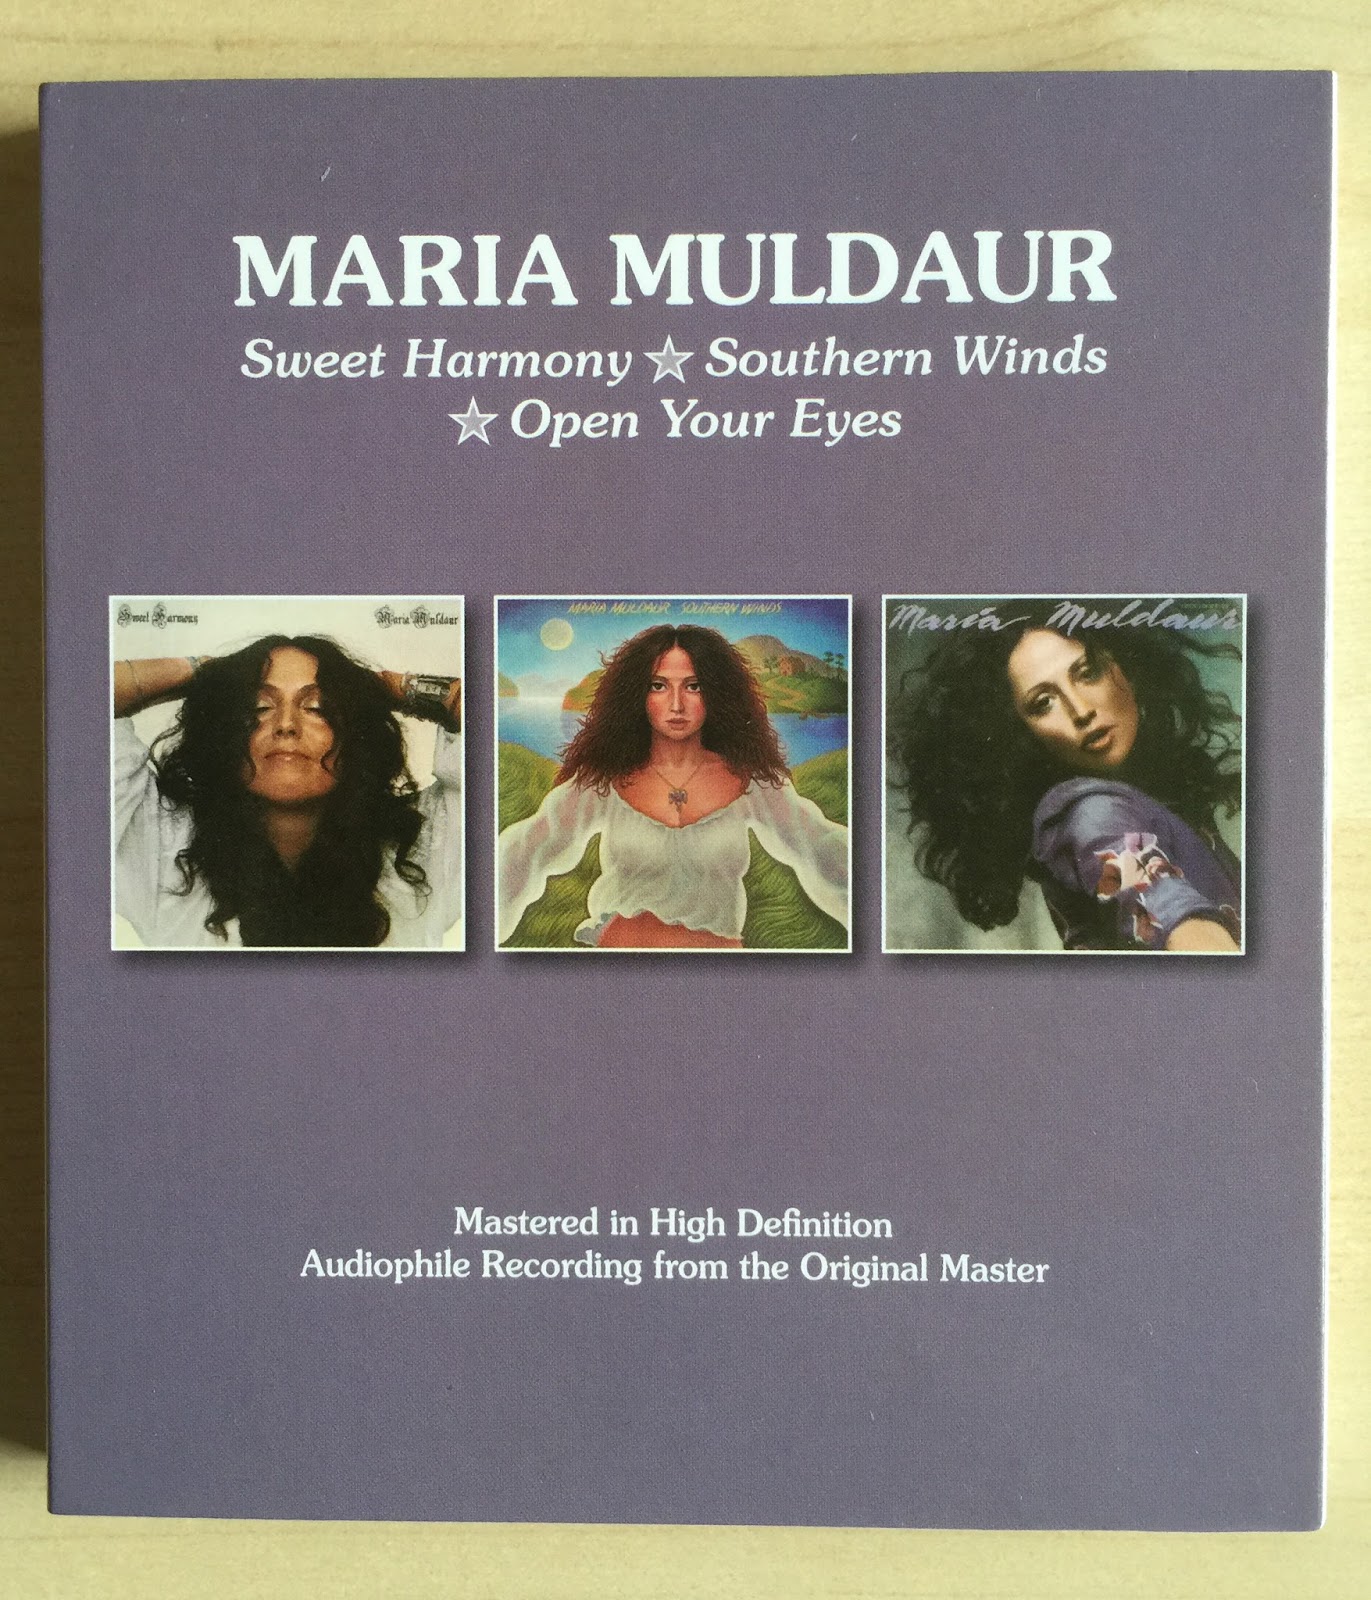 "Sweet Harmony/Southern Winds/Open Your Eyes" by MARIA MULDAUR (2...